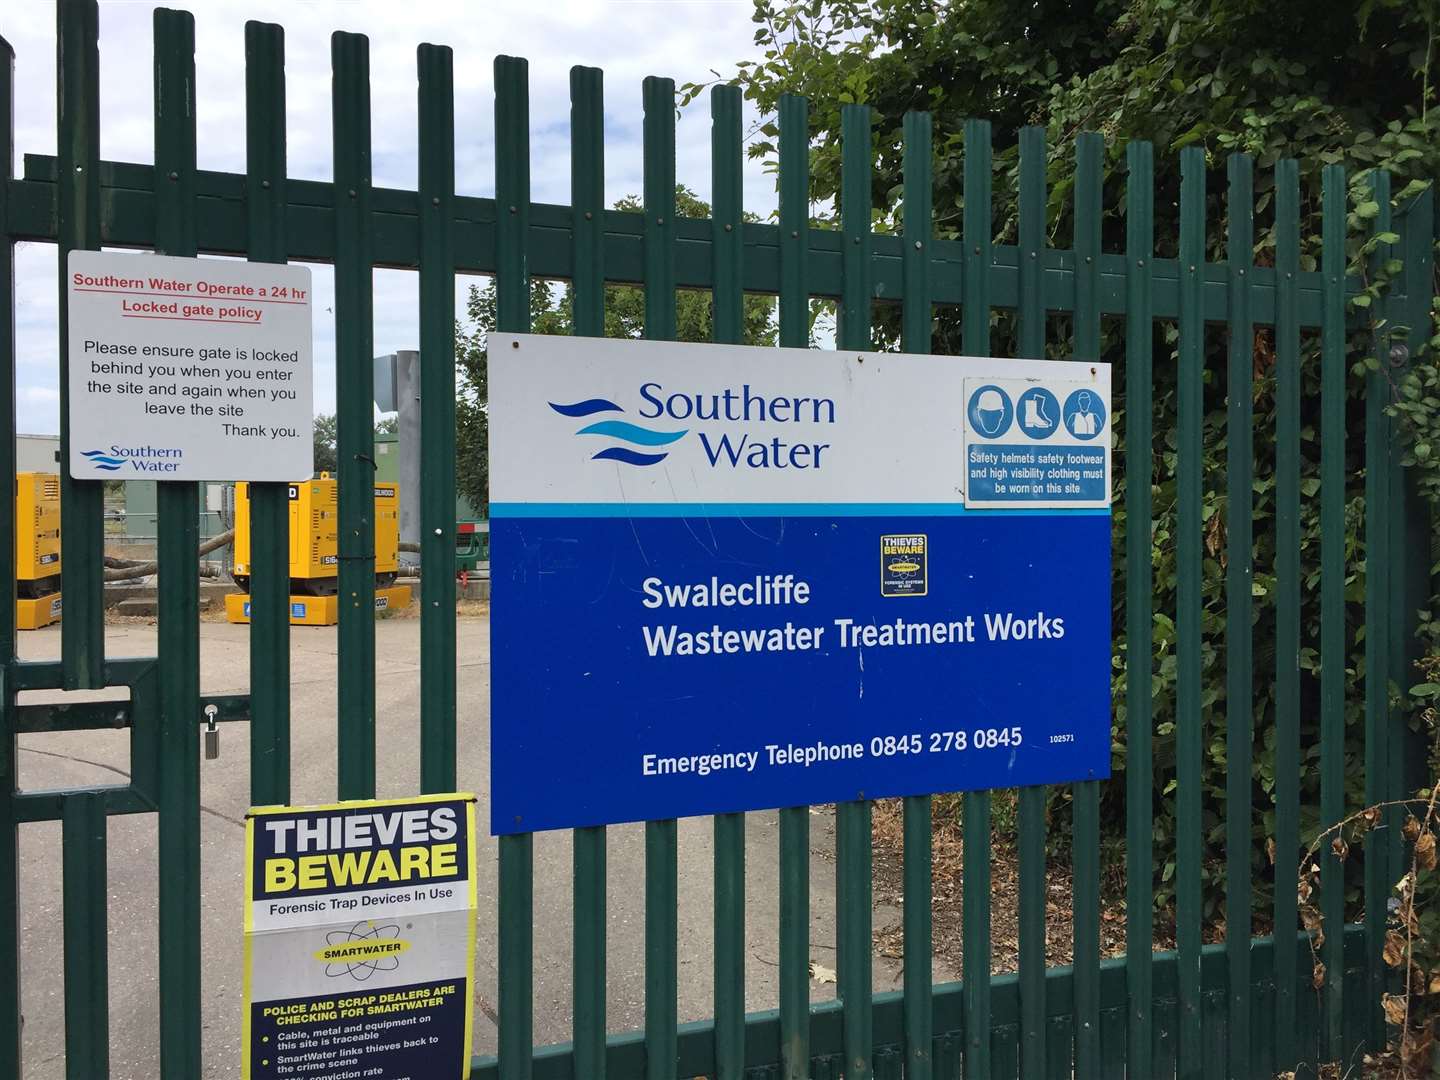 Southern Water's treatment works in Swalecliffe near Whitstable, which has been a source of misery for many residents after a number of releases